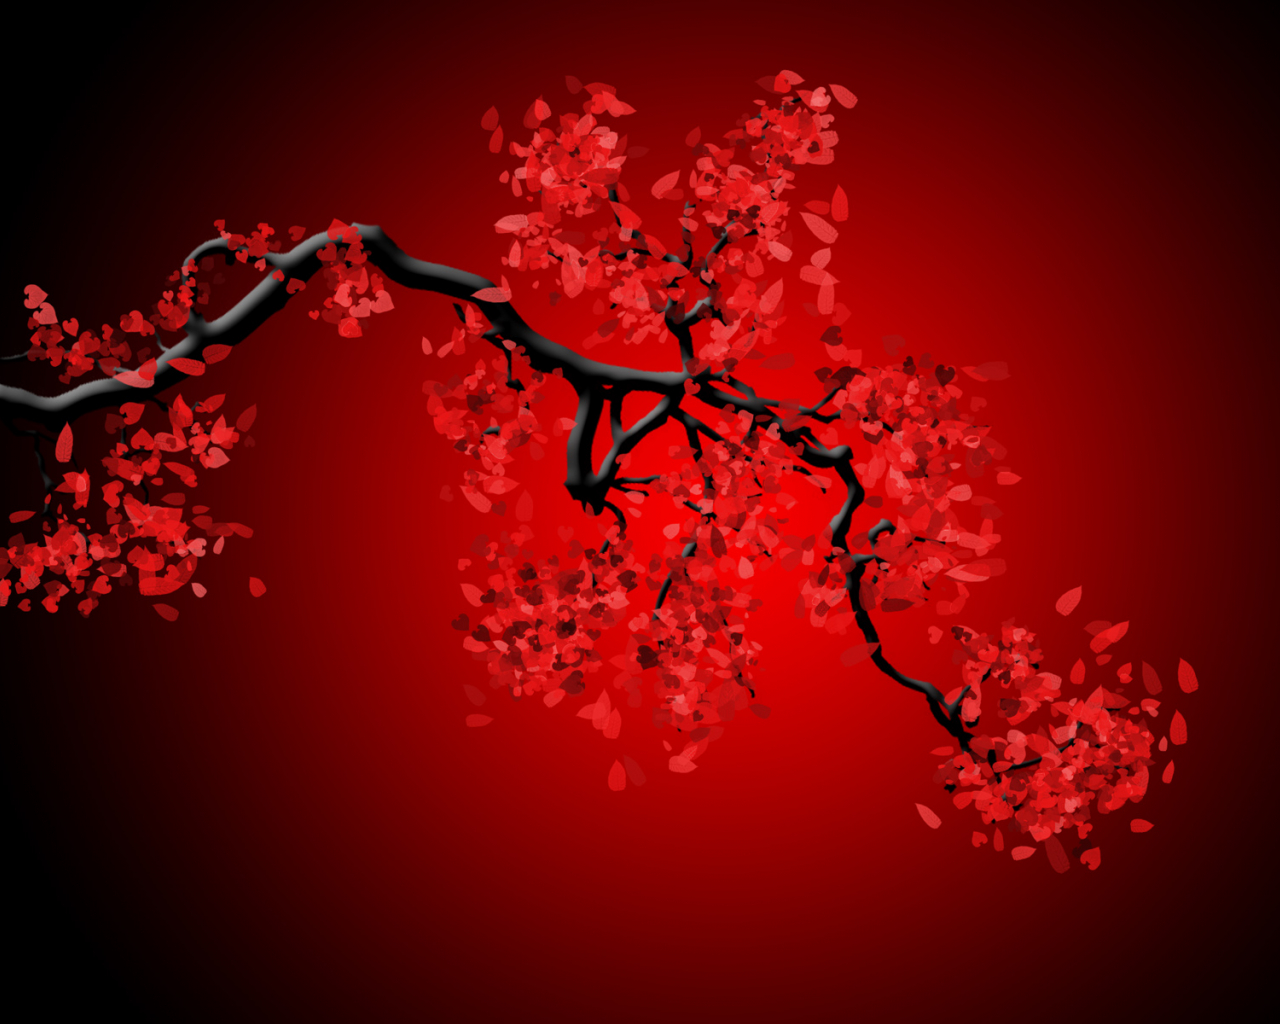 Cherry Blossom Red And Black Wallpaper